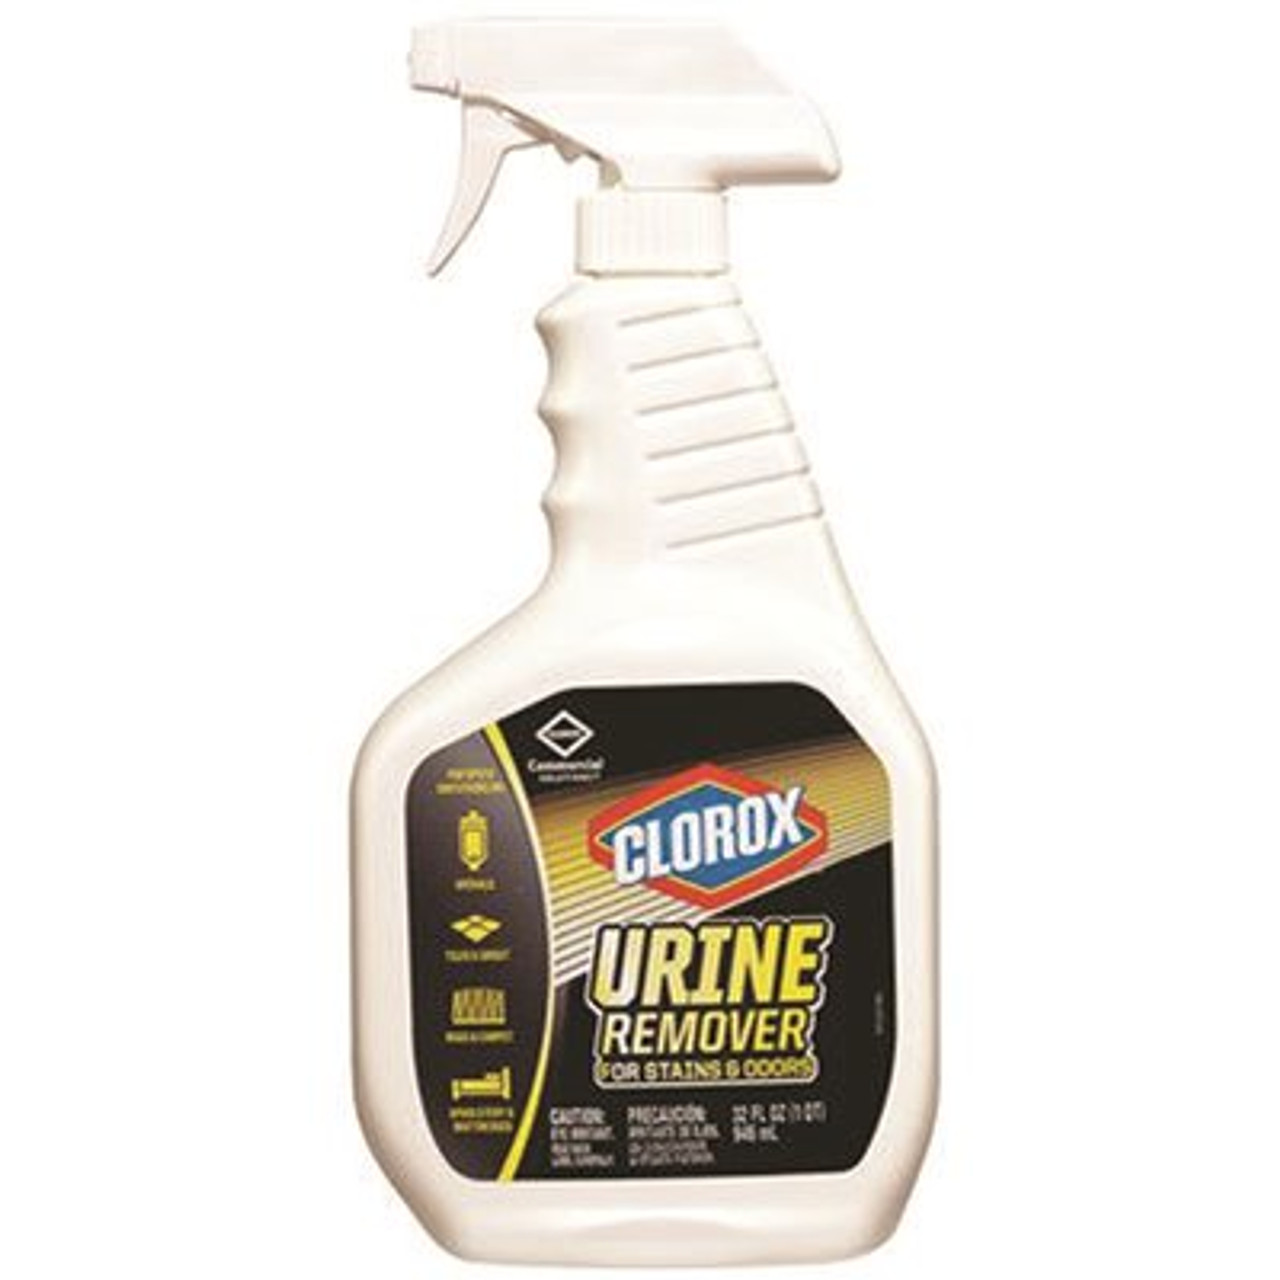 Clorox 32 Oz. Urine Remover For Stains And Odors Spray - 303585